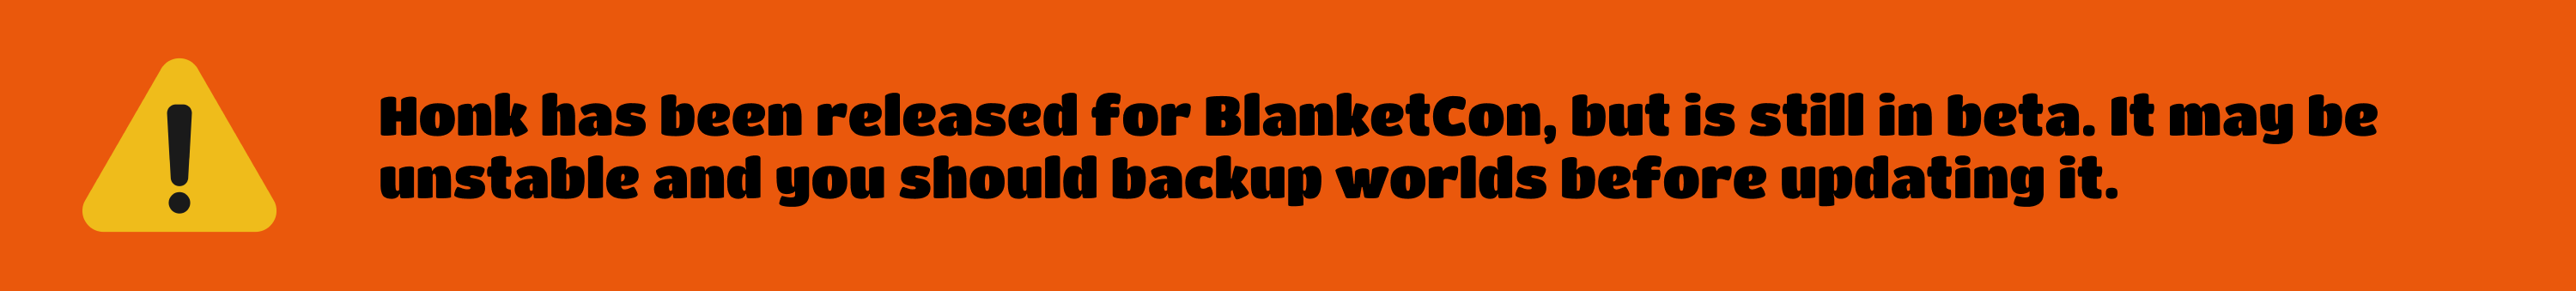 Honk has been released for BlanketCon, but is still in beta. It may be unstable and you should backup worlds before updating it.